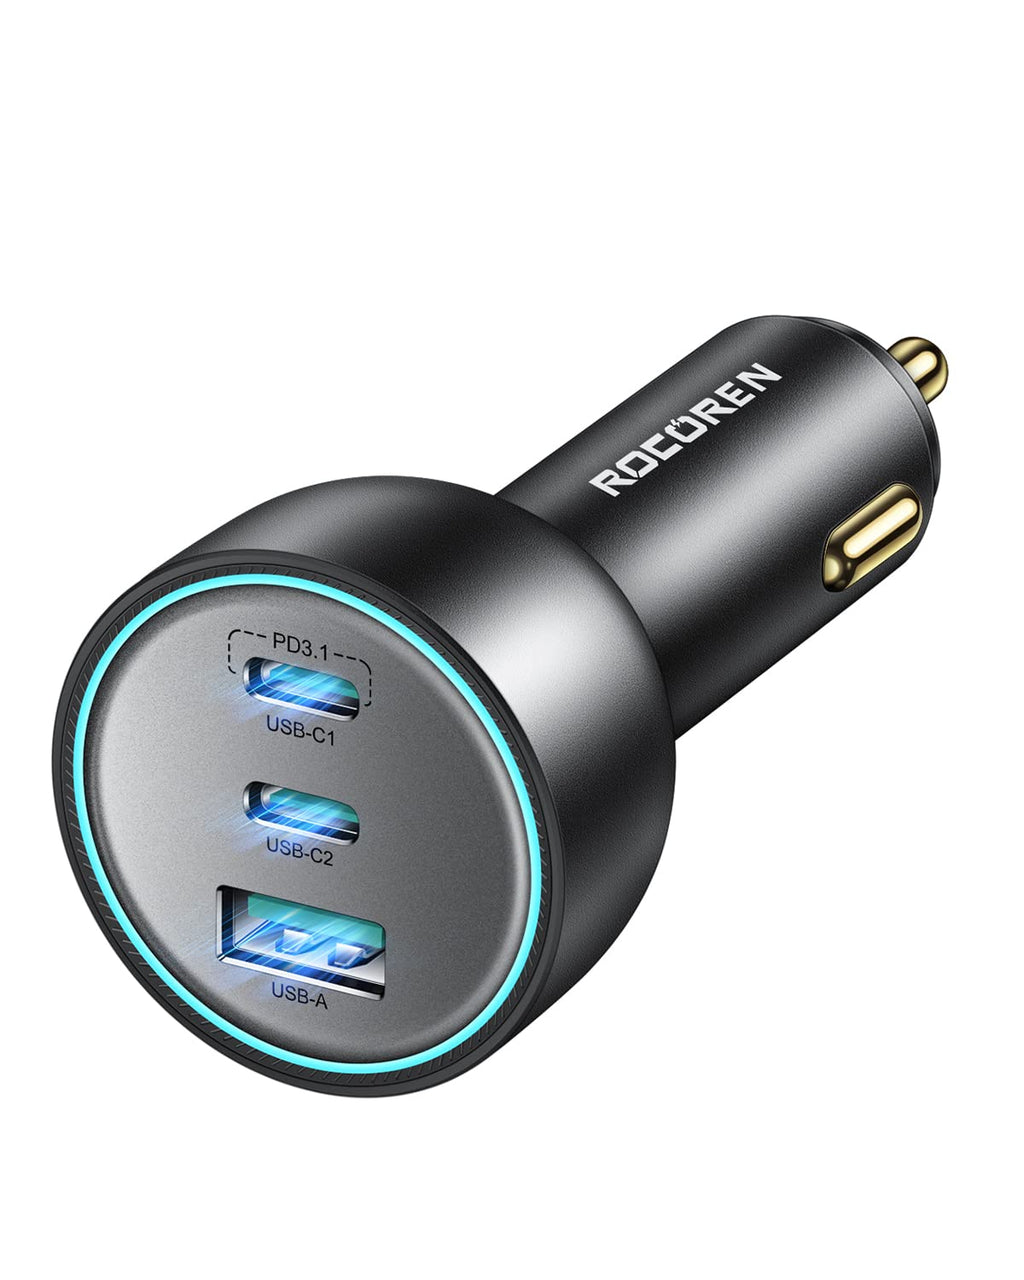  [AUSTRALIA] - 165W USB C Car Charger, Rocoren Type C Car Charger, PD3.1 140W/PD3.0 100W QC5/4.0 3 Ports Super Fast Charging Car Phone Adapter for iPhone, Samsung, iPad, MacBook Pro/Air, Laptop, Steam Deck, ROG Ally